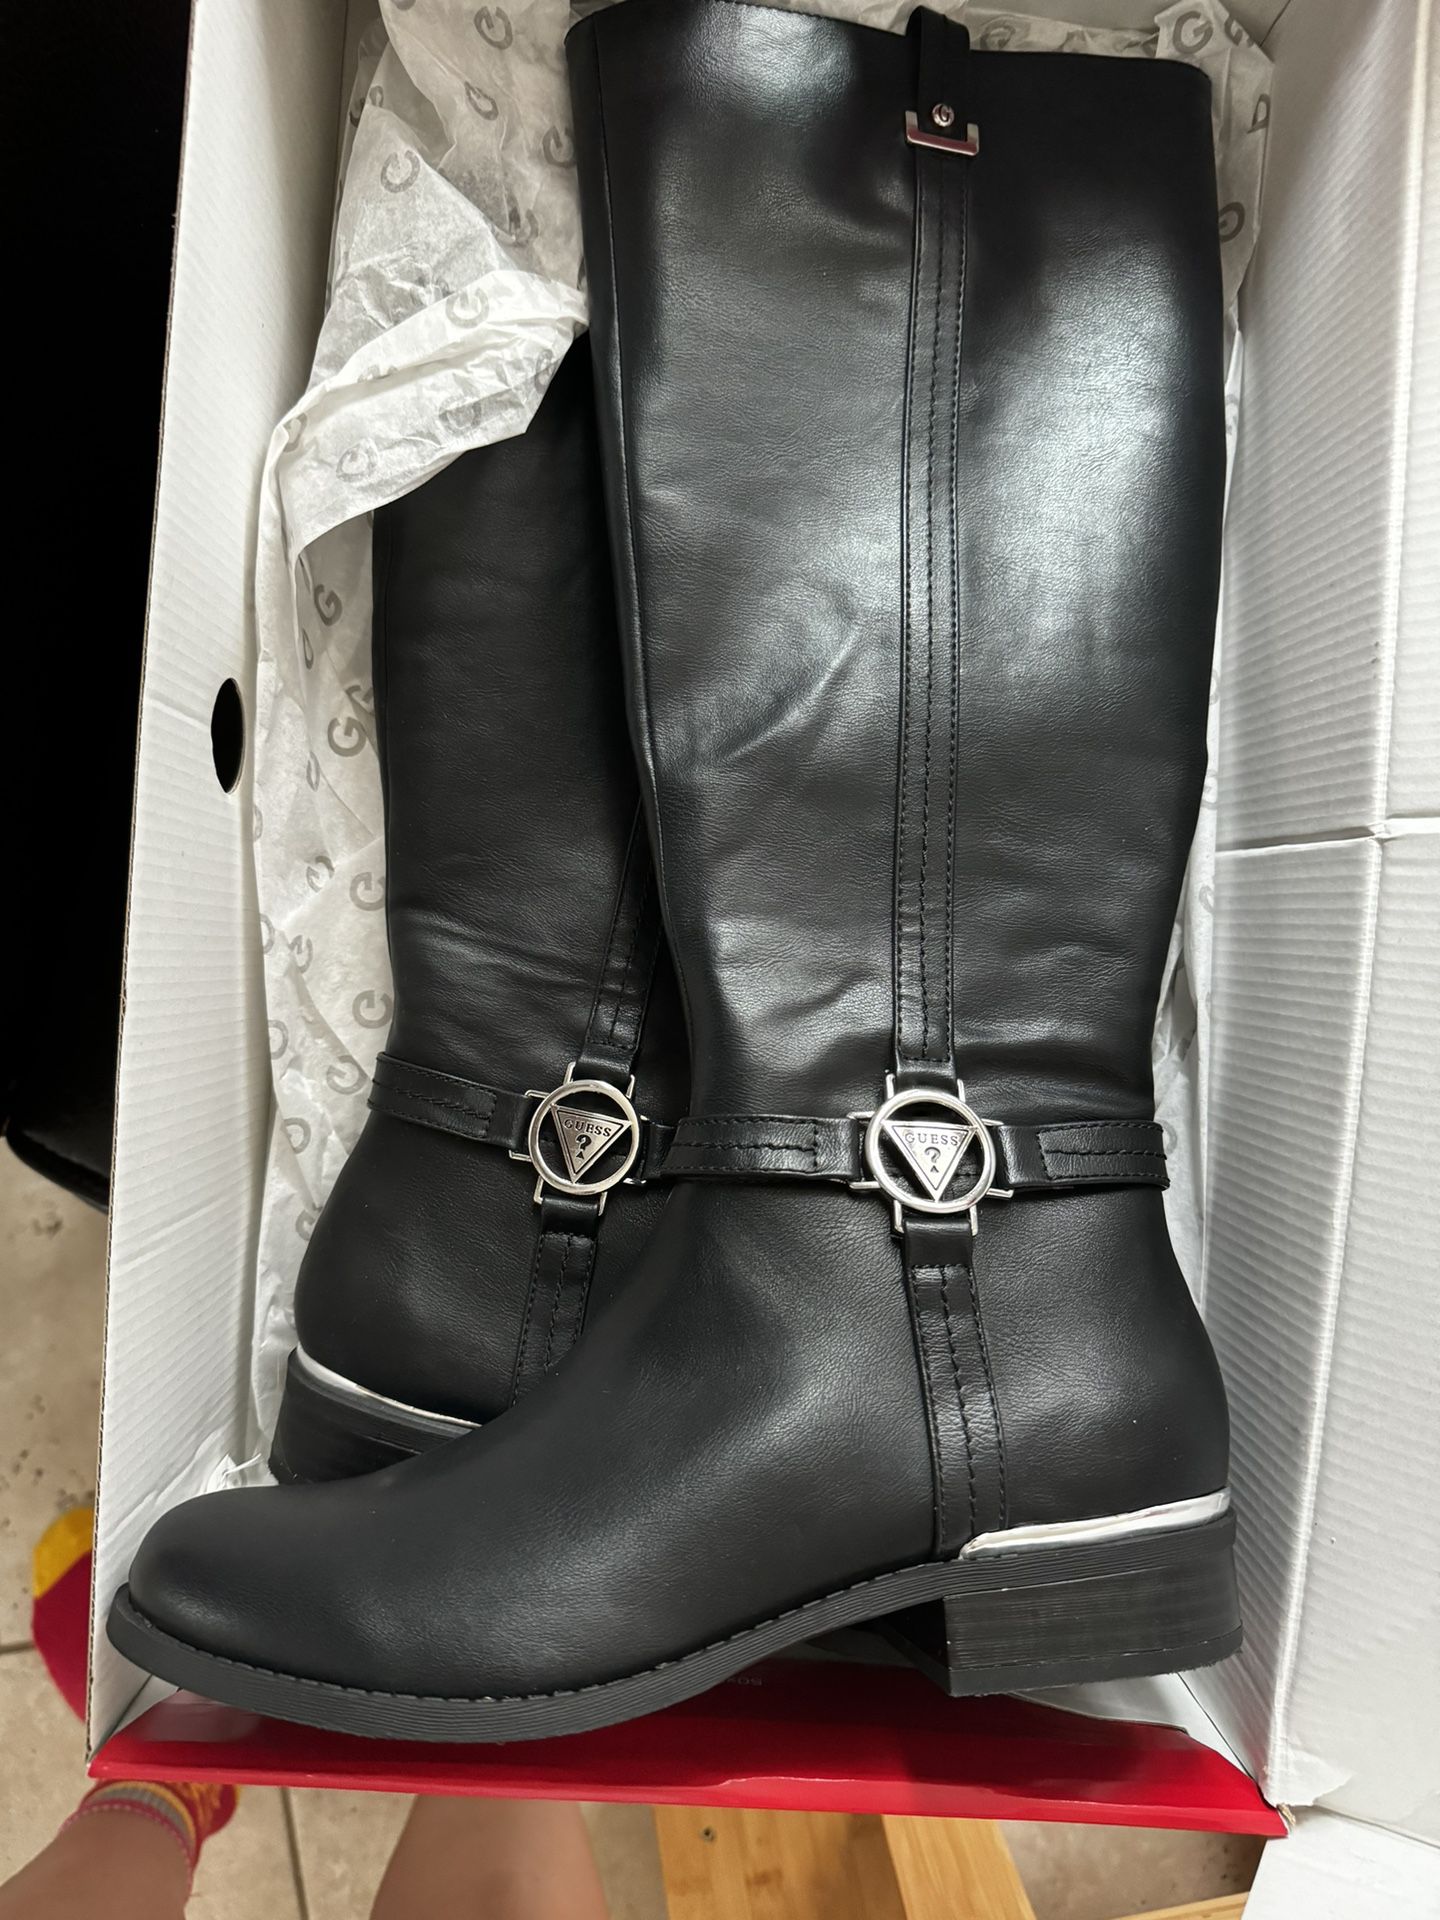 Guess Boots New 8.5 Size 